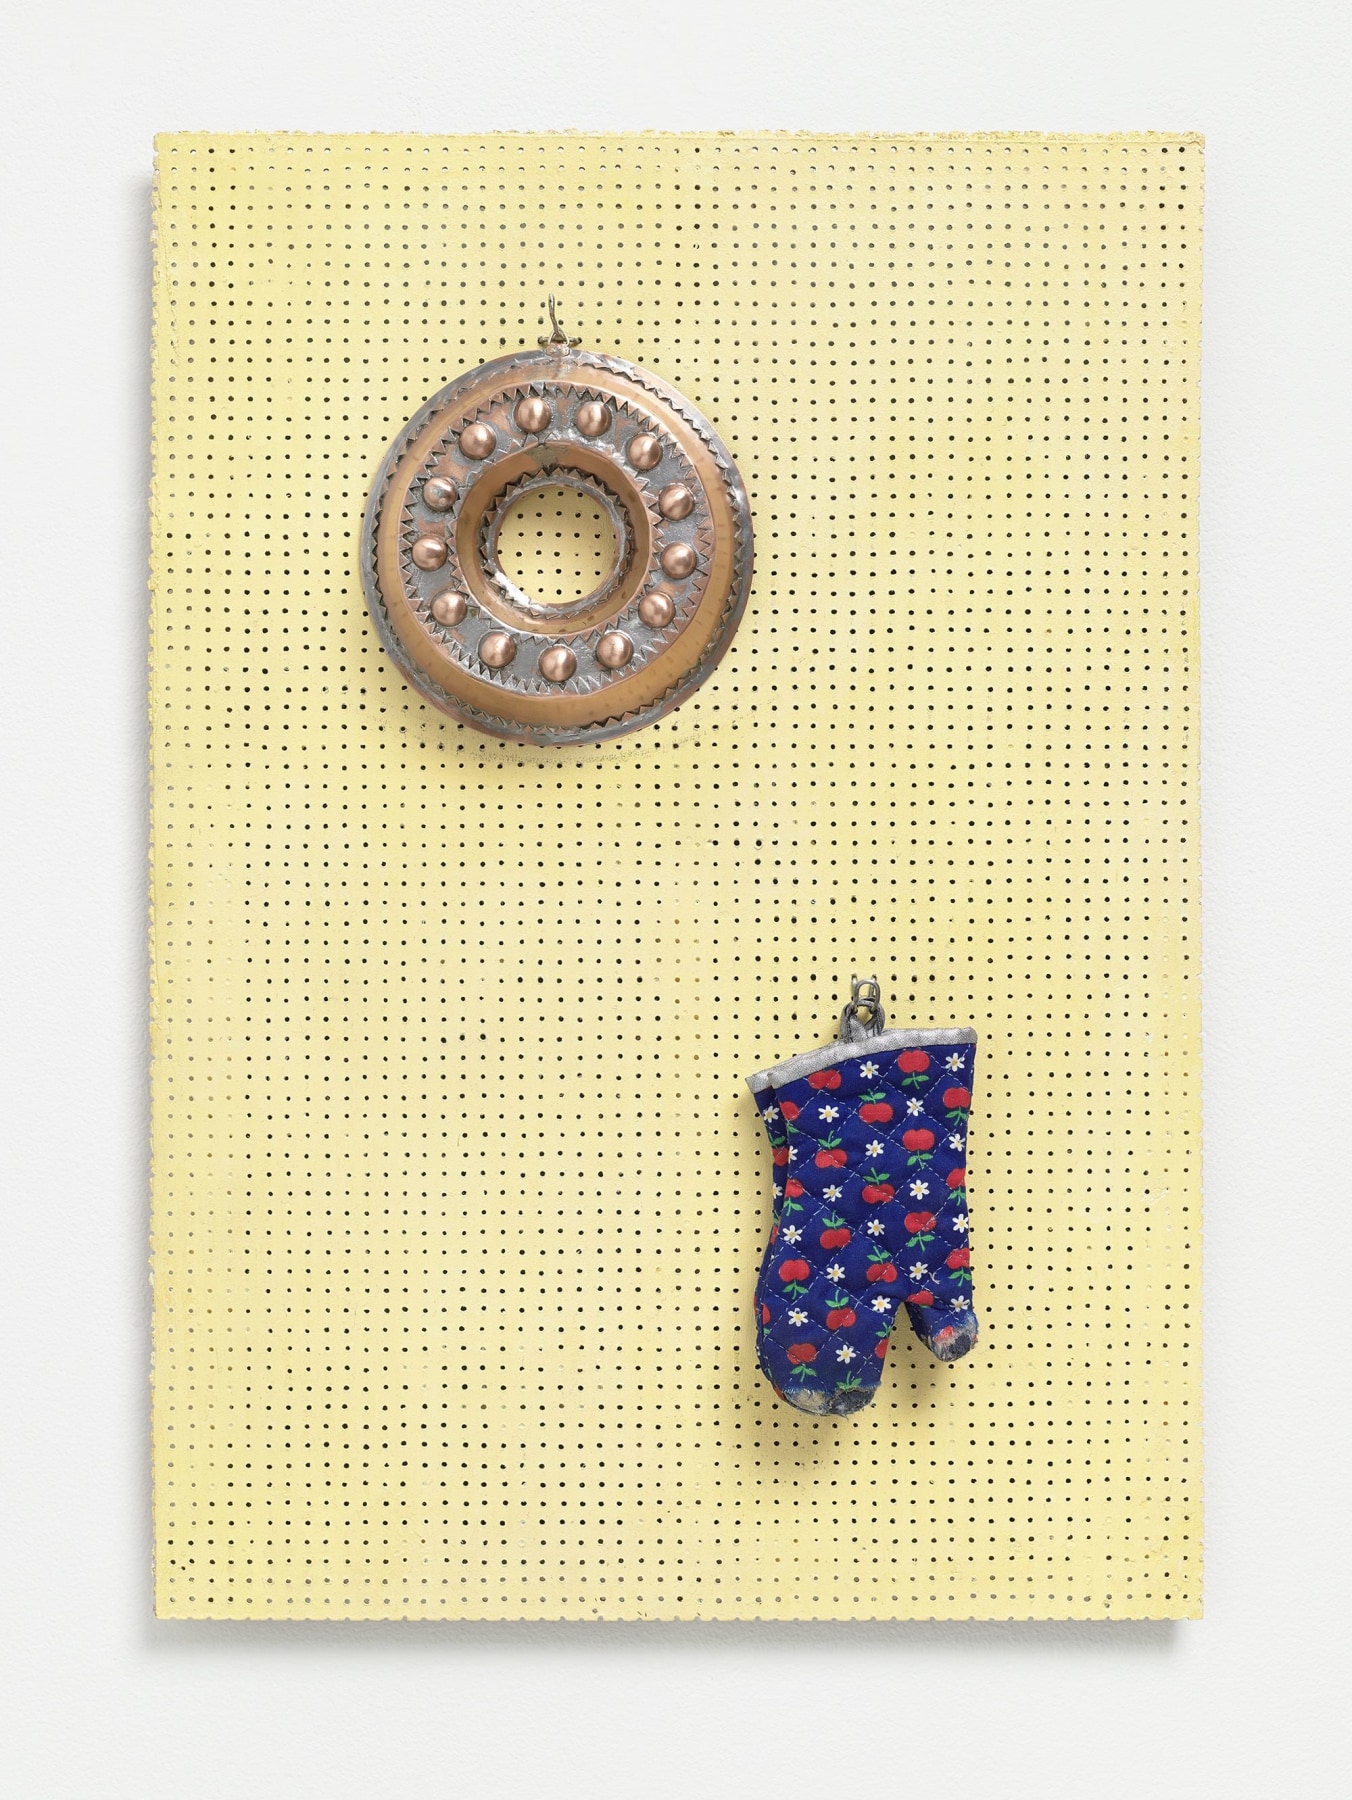 Kitchenette 2011&ndash;2014 acrylic on particle board, copper, sewn fabrix, and wire